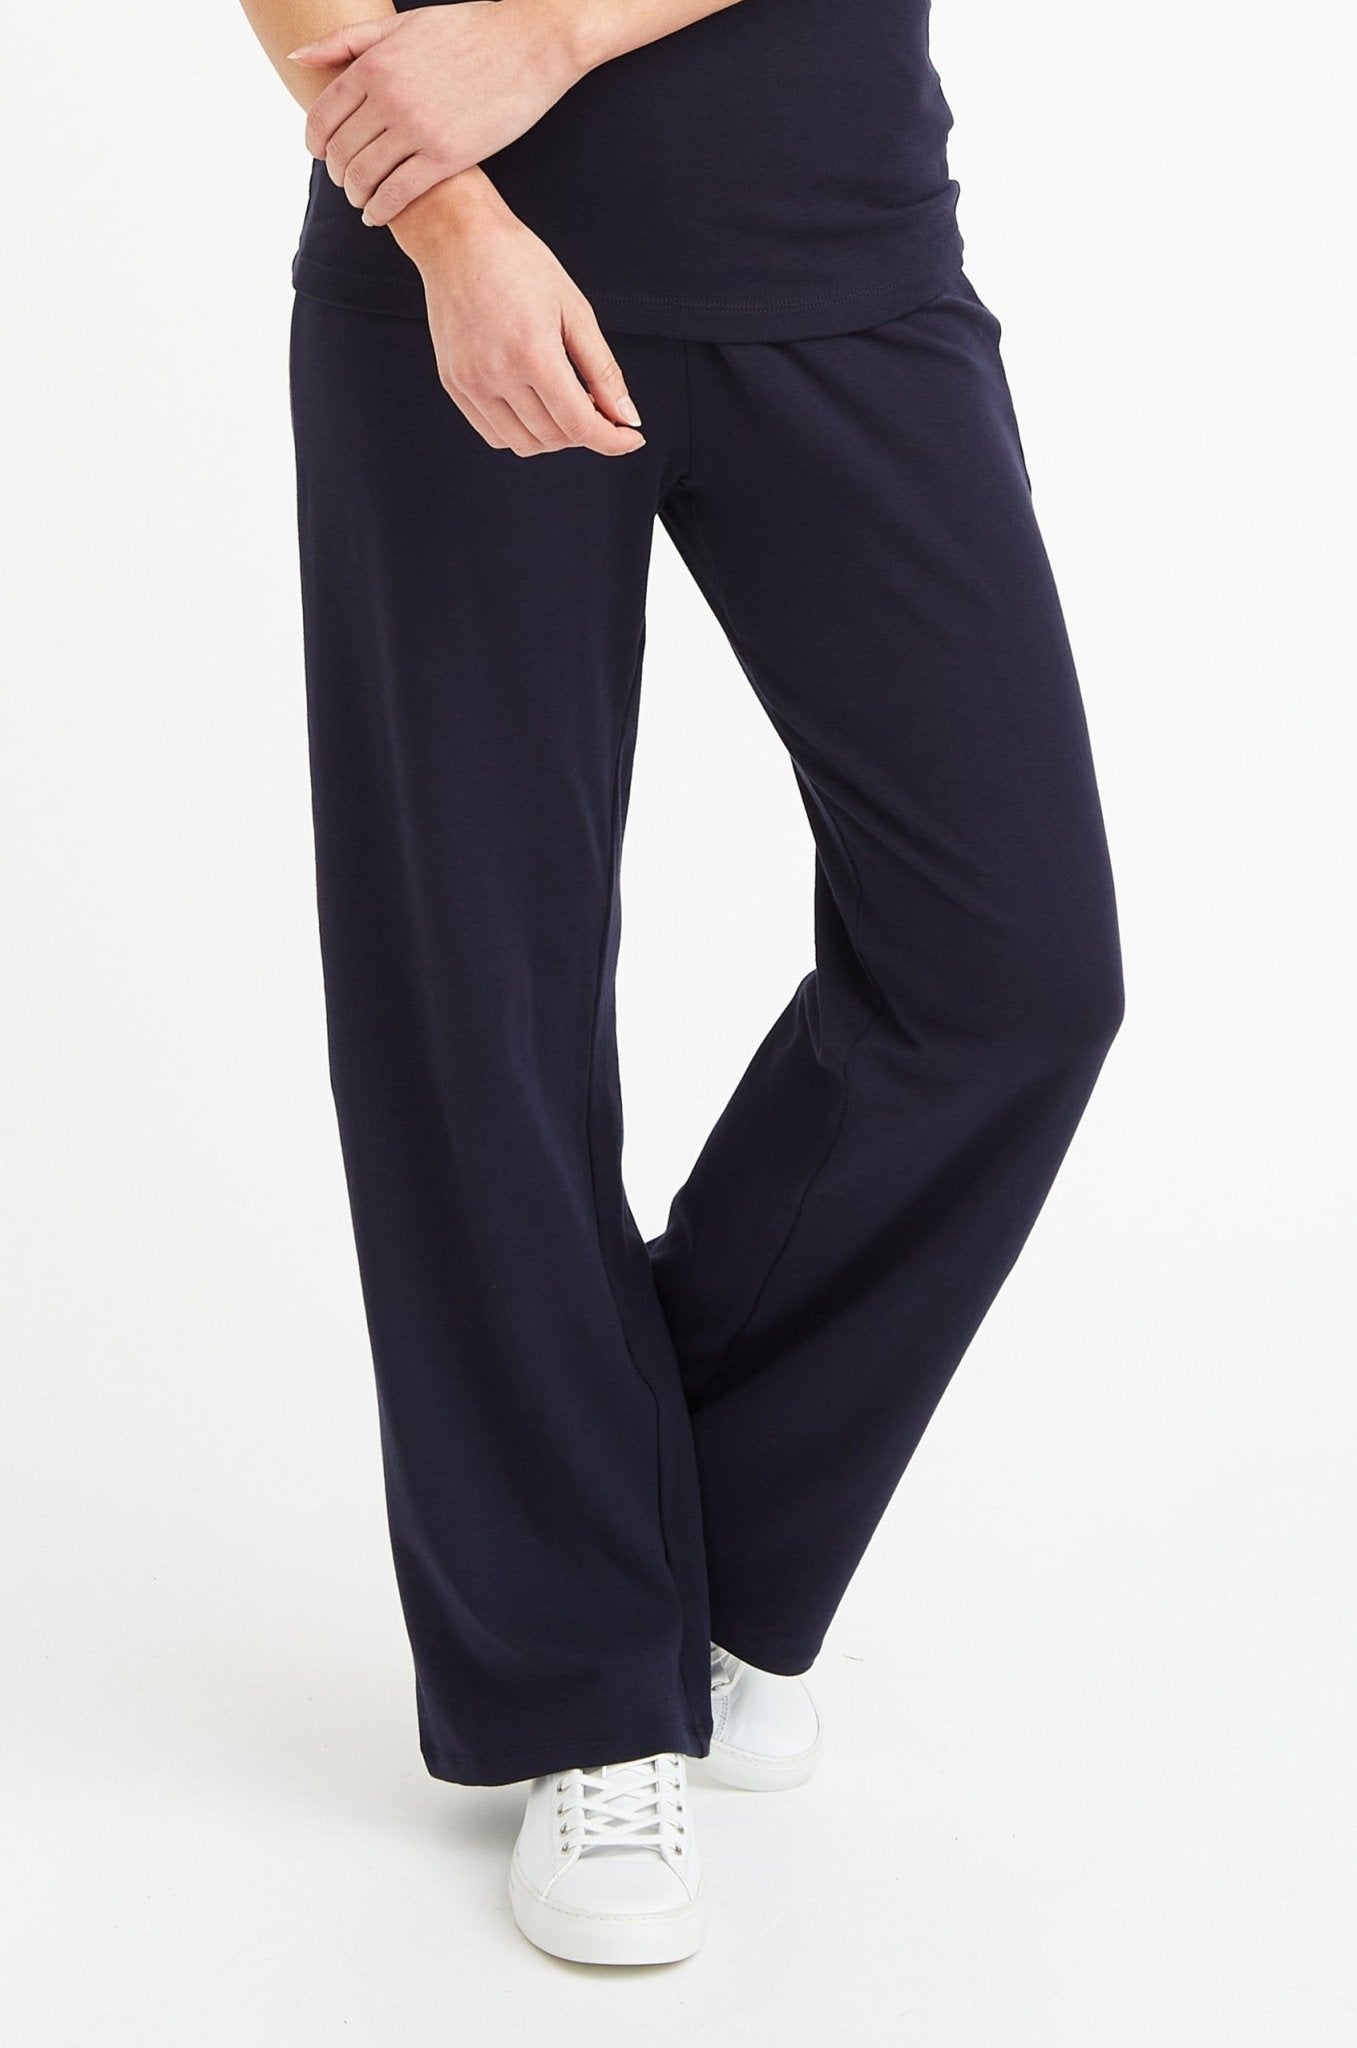 PALM PANT IN PIMA COTTON STRETCH - Jarbo